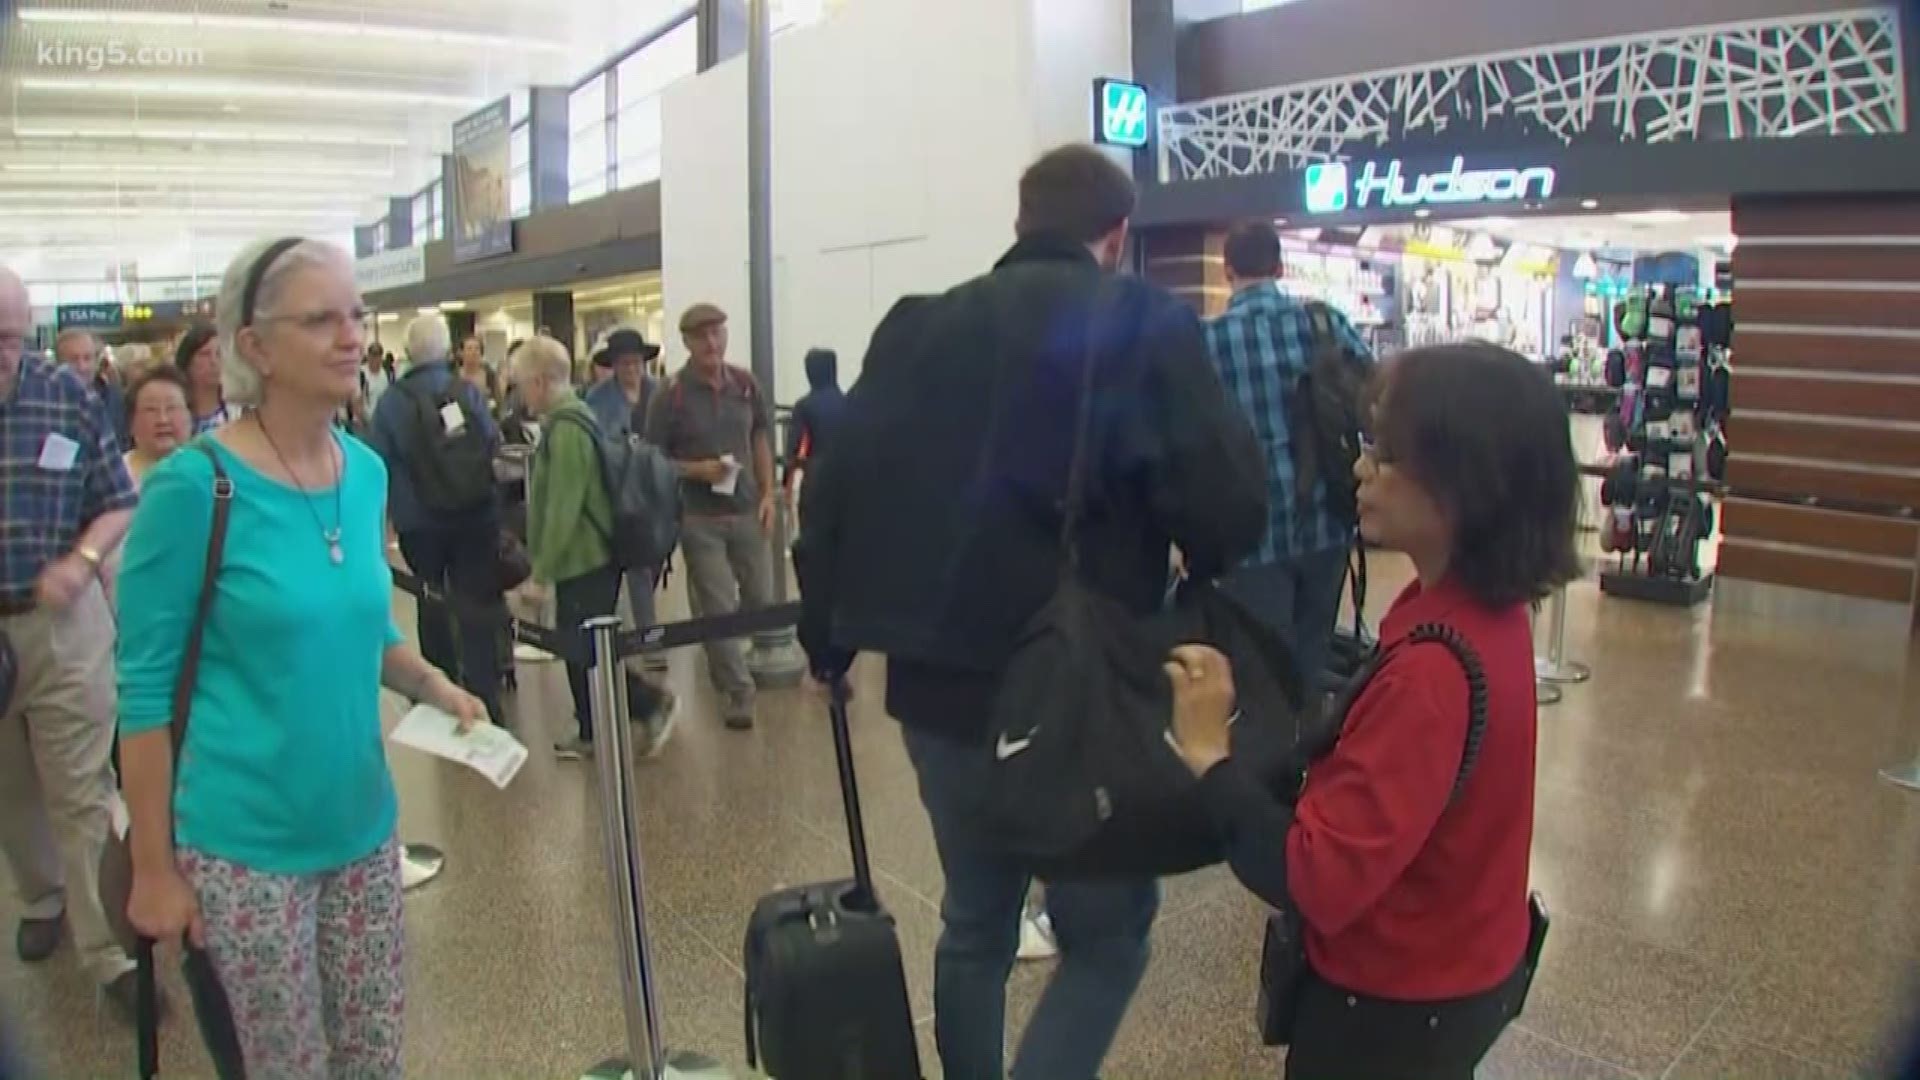 KING 5's Glenn Farley on how to prepare for the busy travel season.